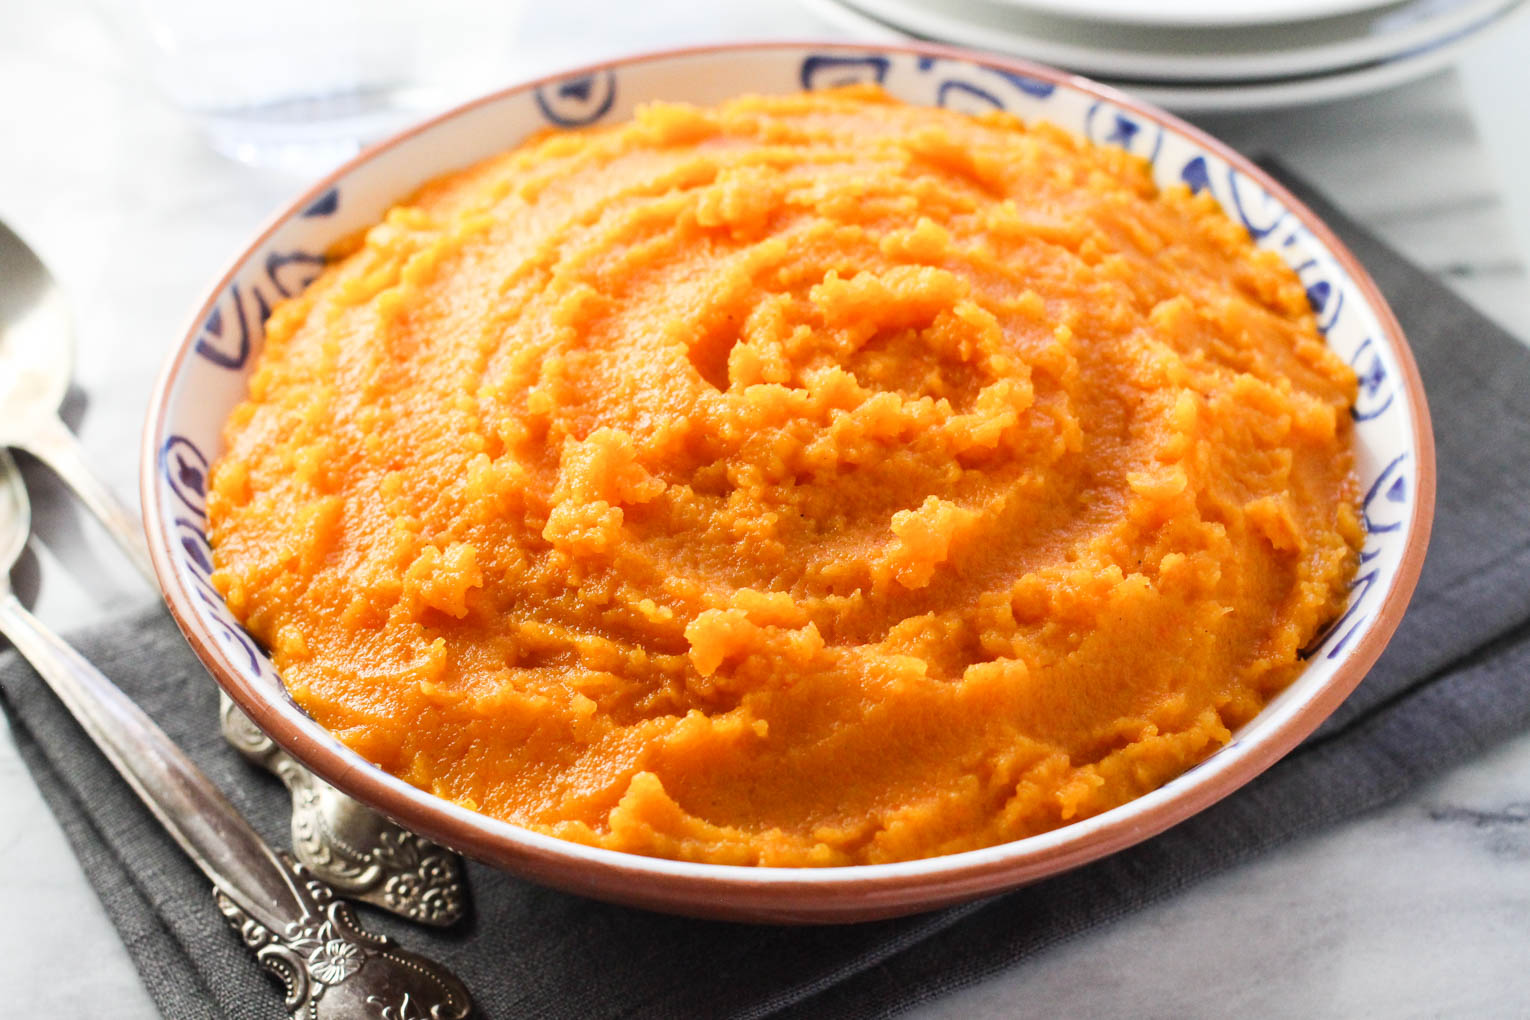 Carrot and swede mash in a bowl standing on a napkin. Two silver spoons the the left.